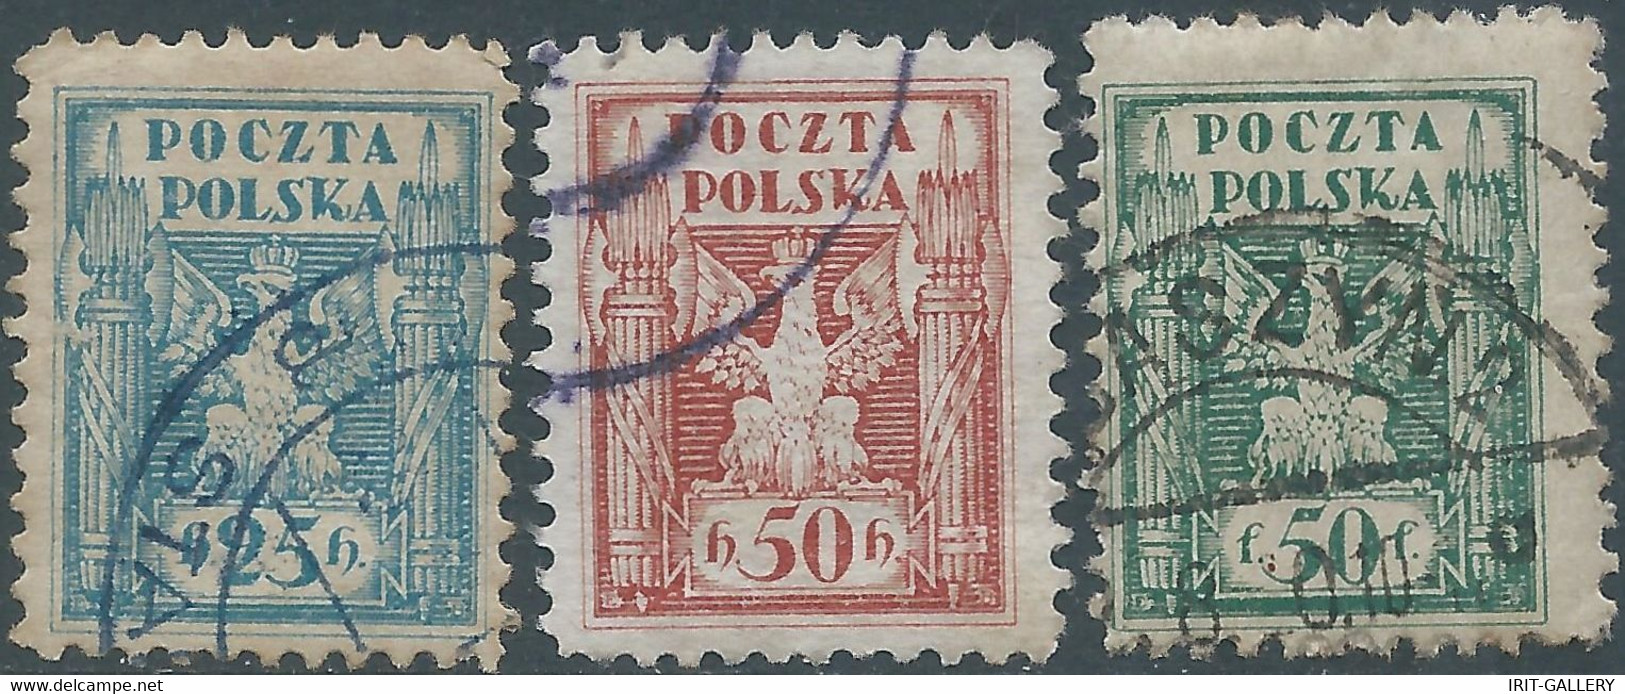 POLONIA-POLAND-POLSKA,1919 South Poland Issues,Obliterated - Used Stamps